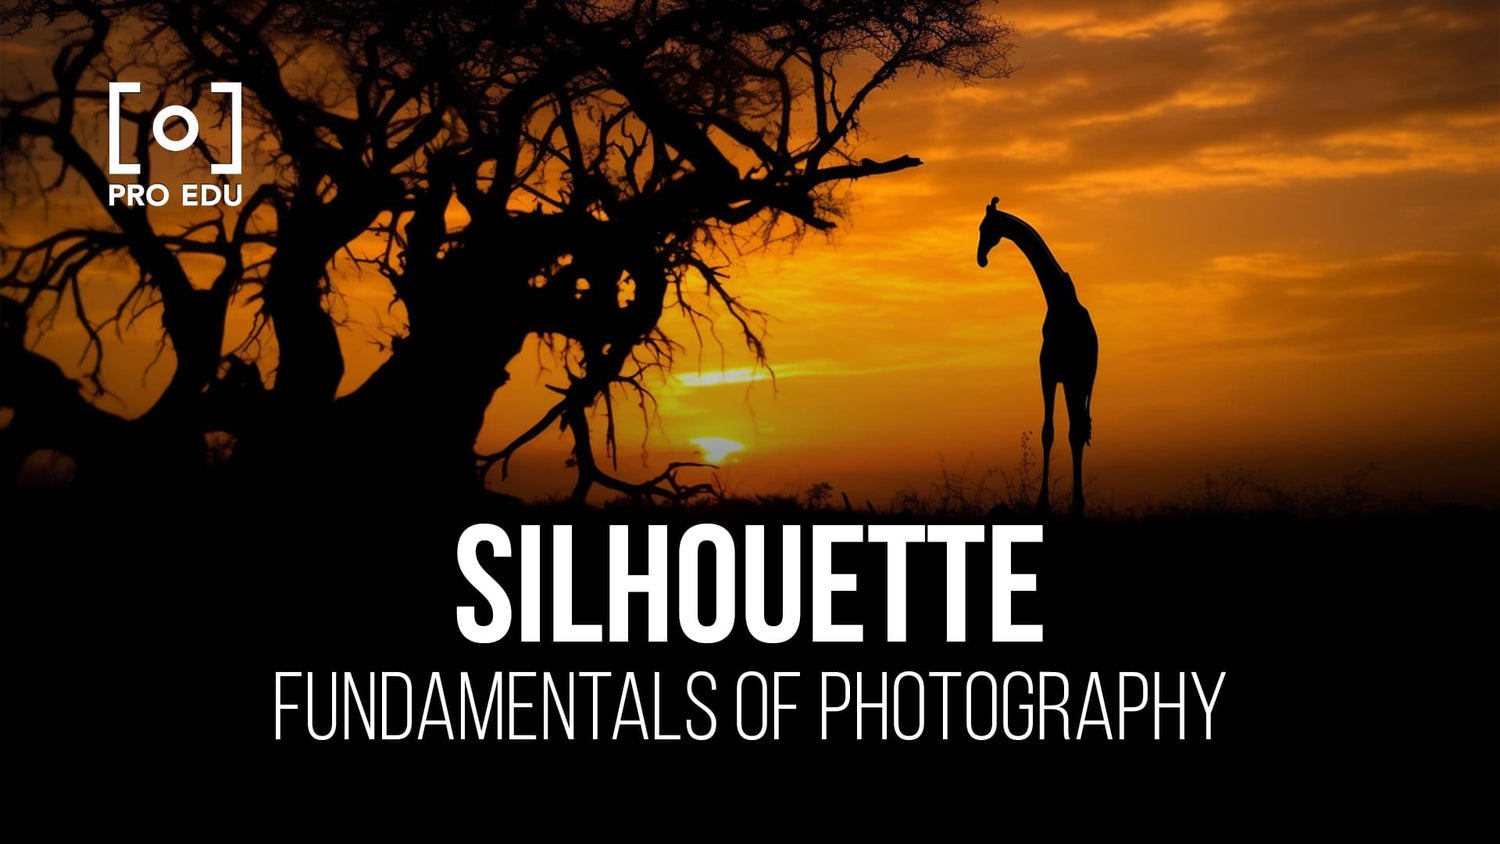 Crafting dramatic images with silhouette photography techniques